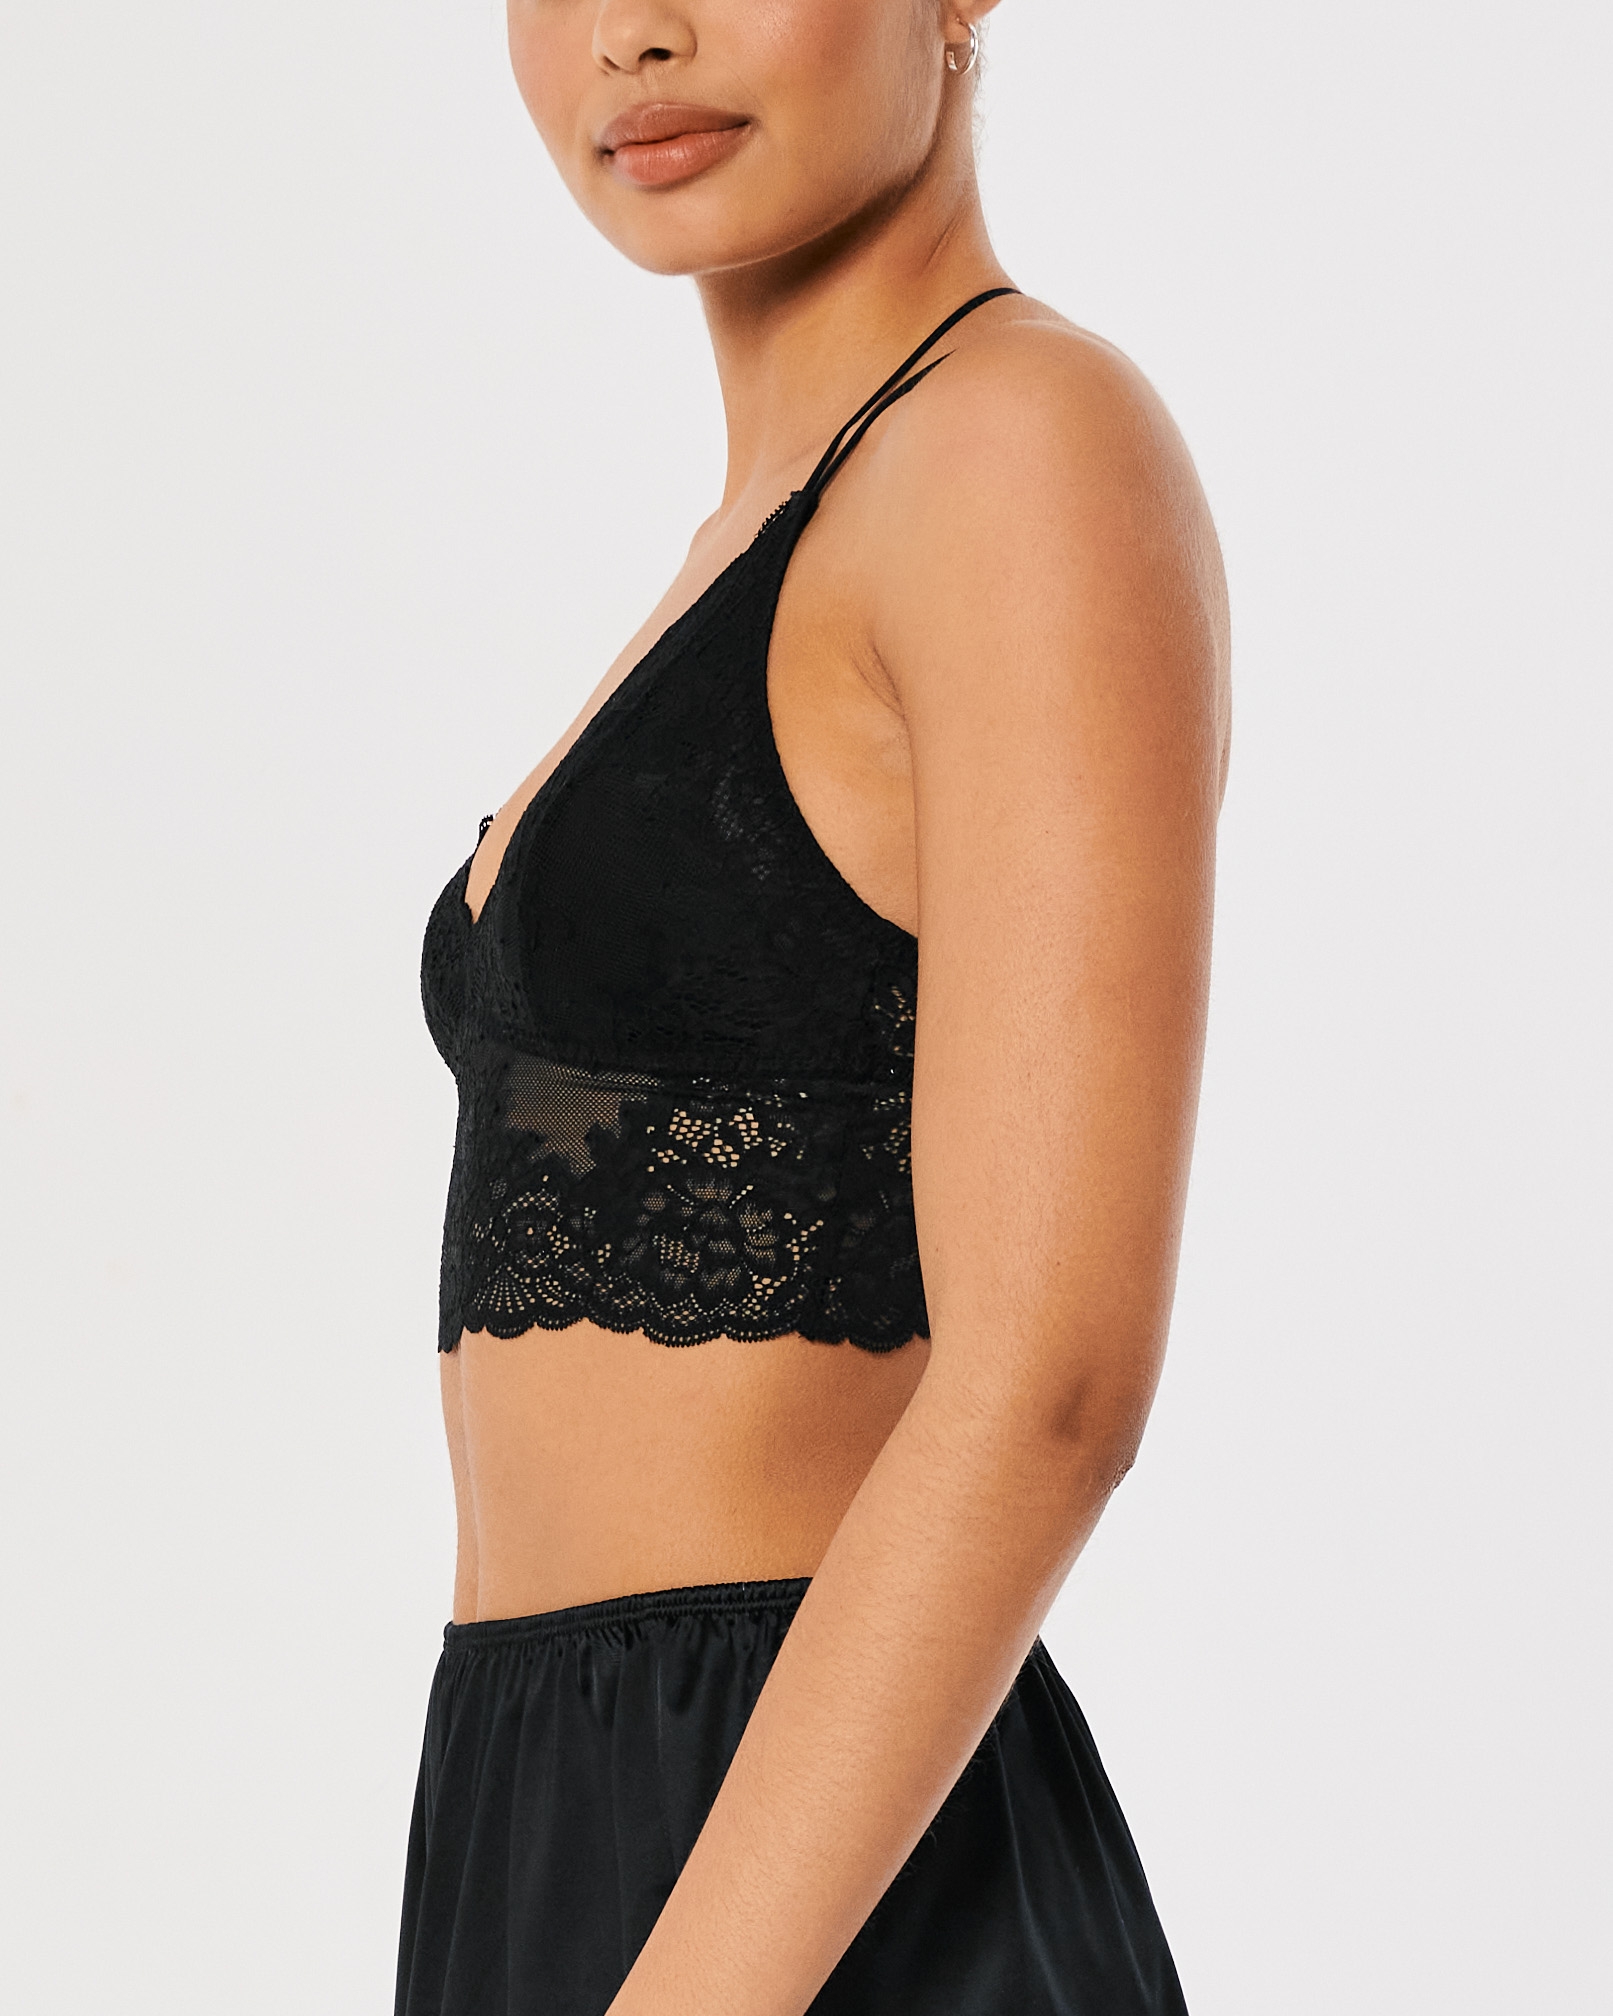 Floral Lace-Trim Bralette by Gilly Hicks